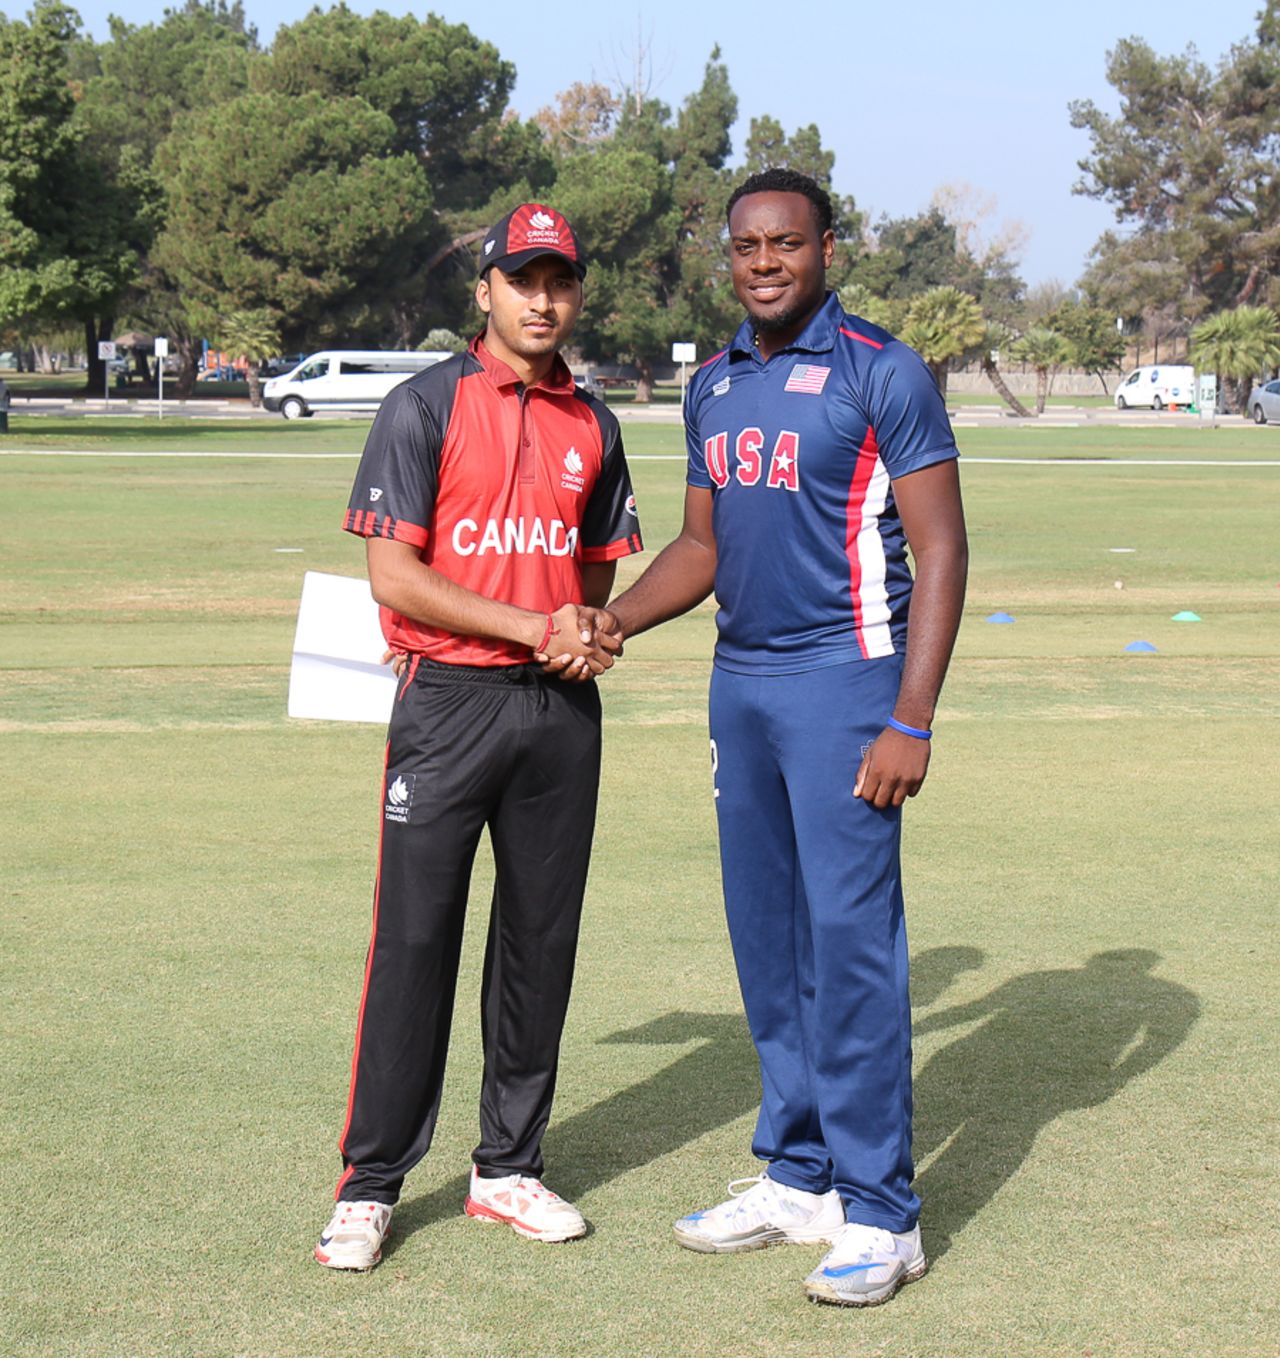 Steven Taylor and Nitish Kumar shake hands at the toss in their first match as captain of their respective sides, USA v Canada, Auty Cup, Los Angeles, October 13, 2016